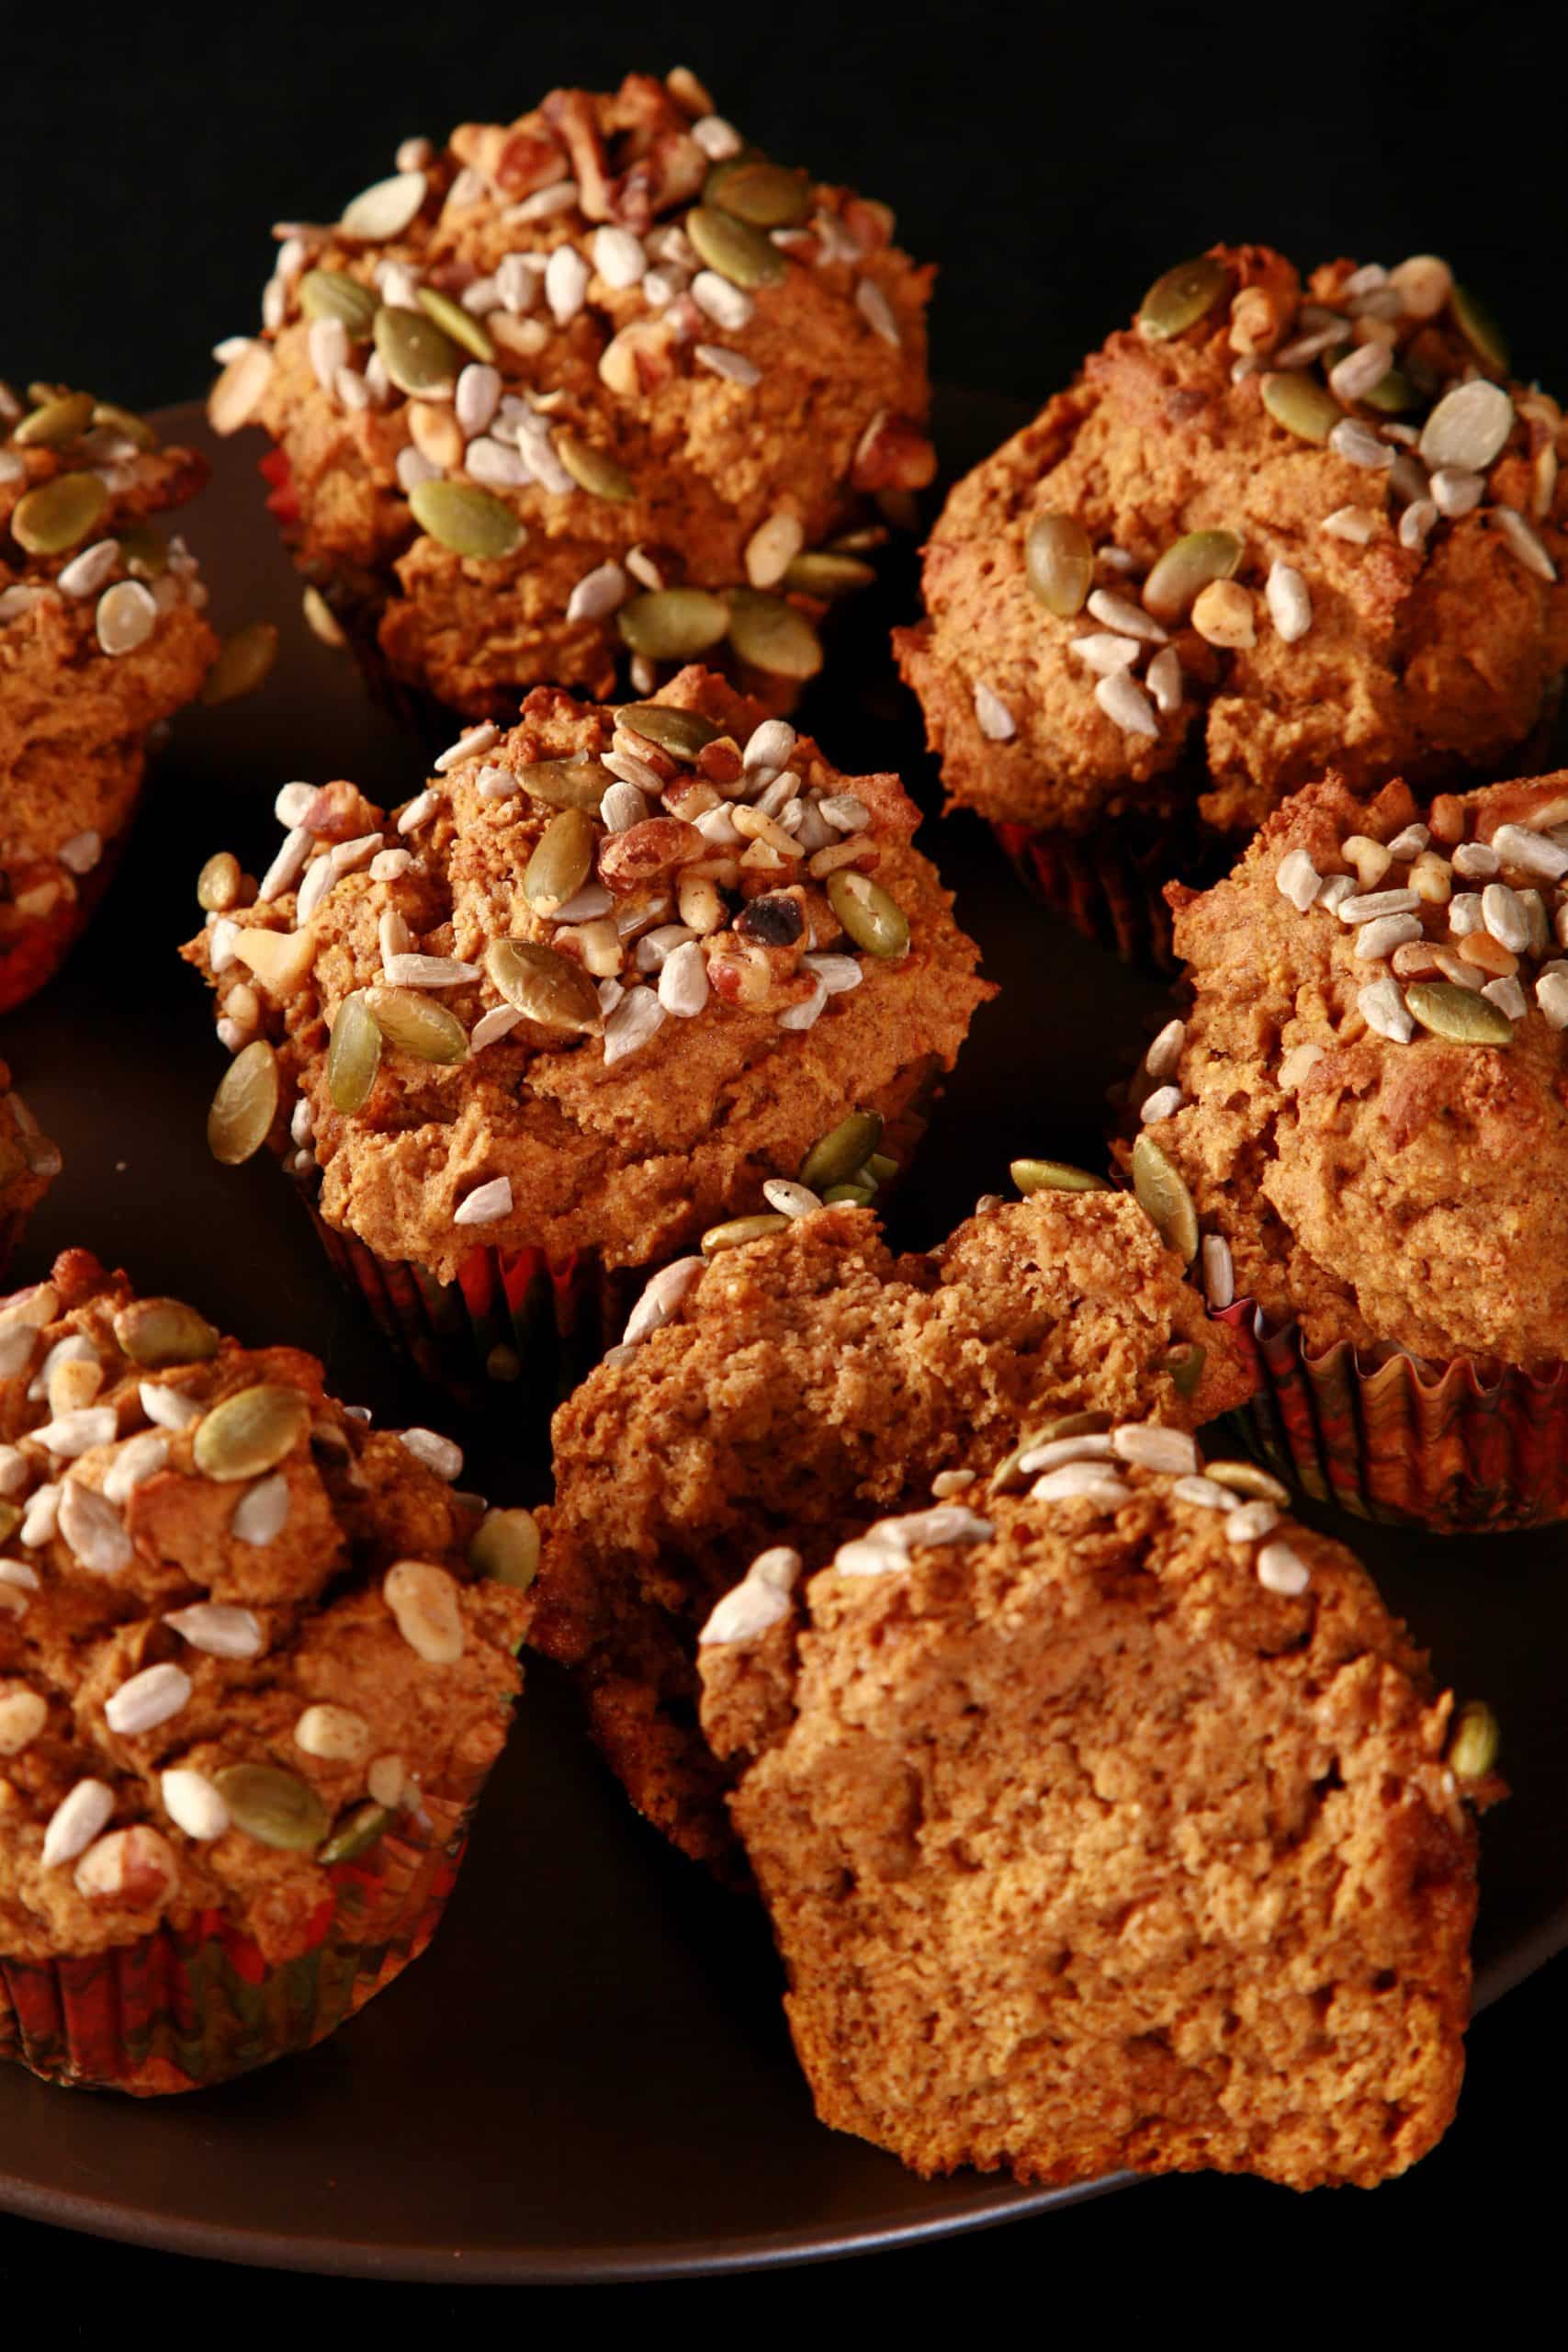 A plate of gluten free pumpkin muffins, all topped with a mix of seeds and nuts.